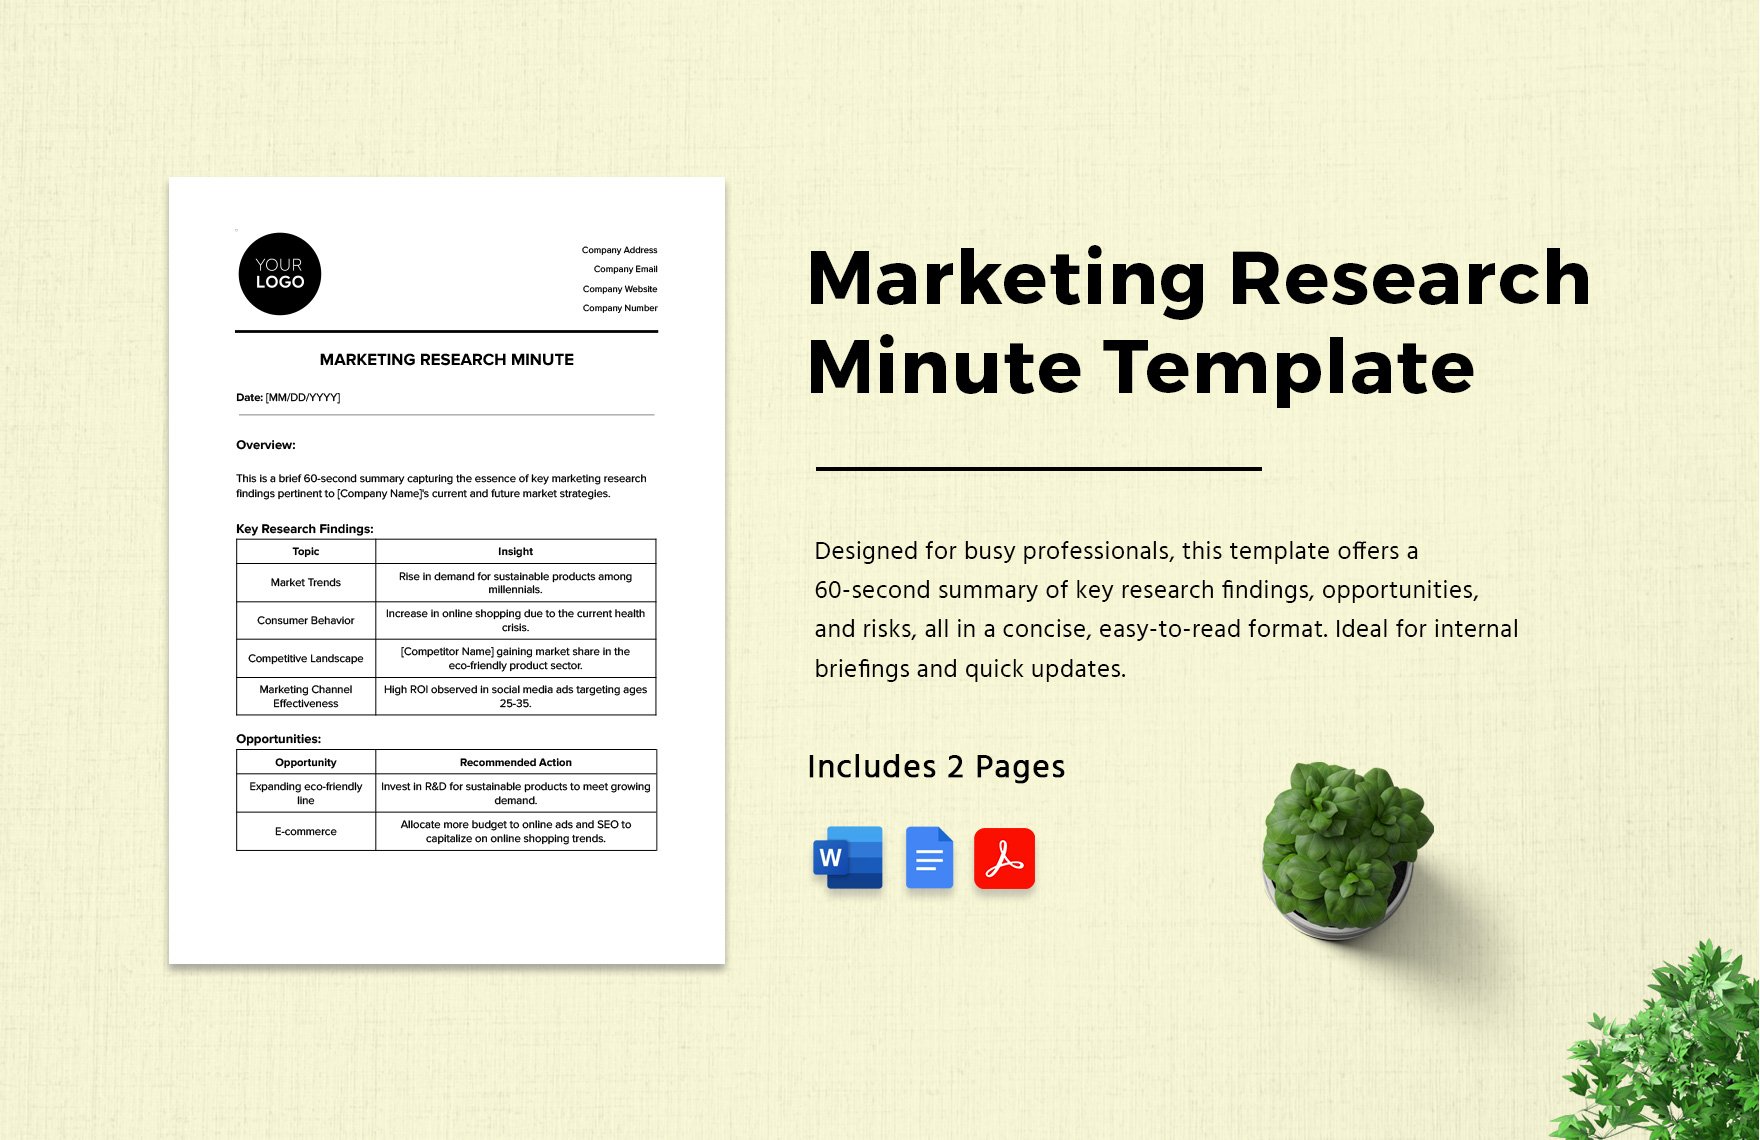 Marketing Research Minute Template in Word, Google Docs, PDF